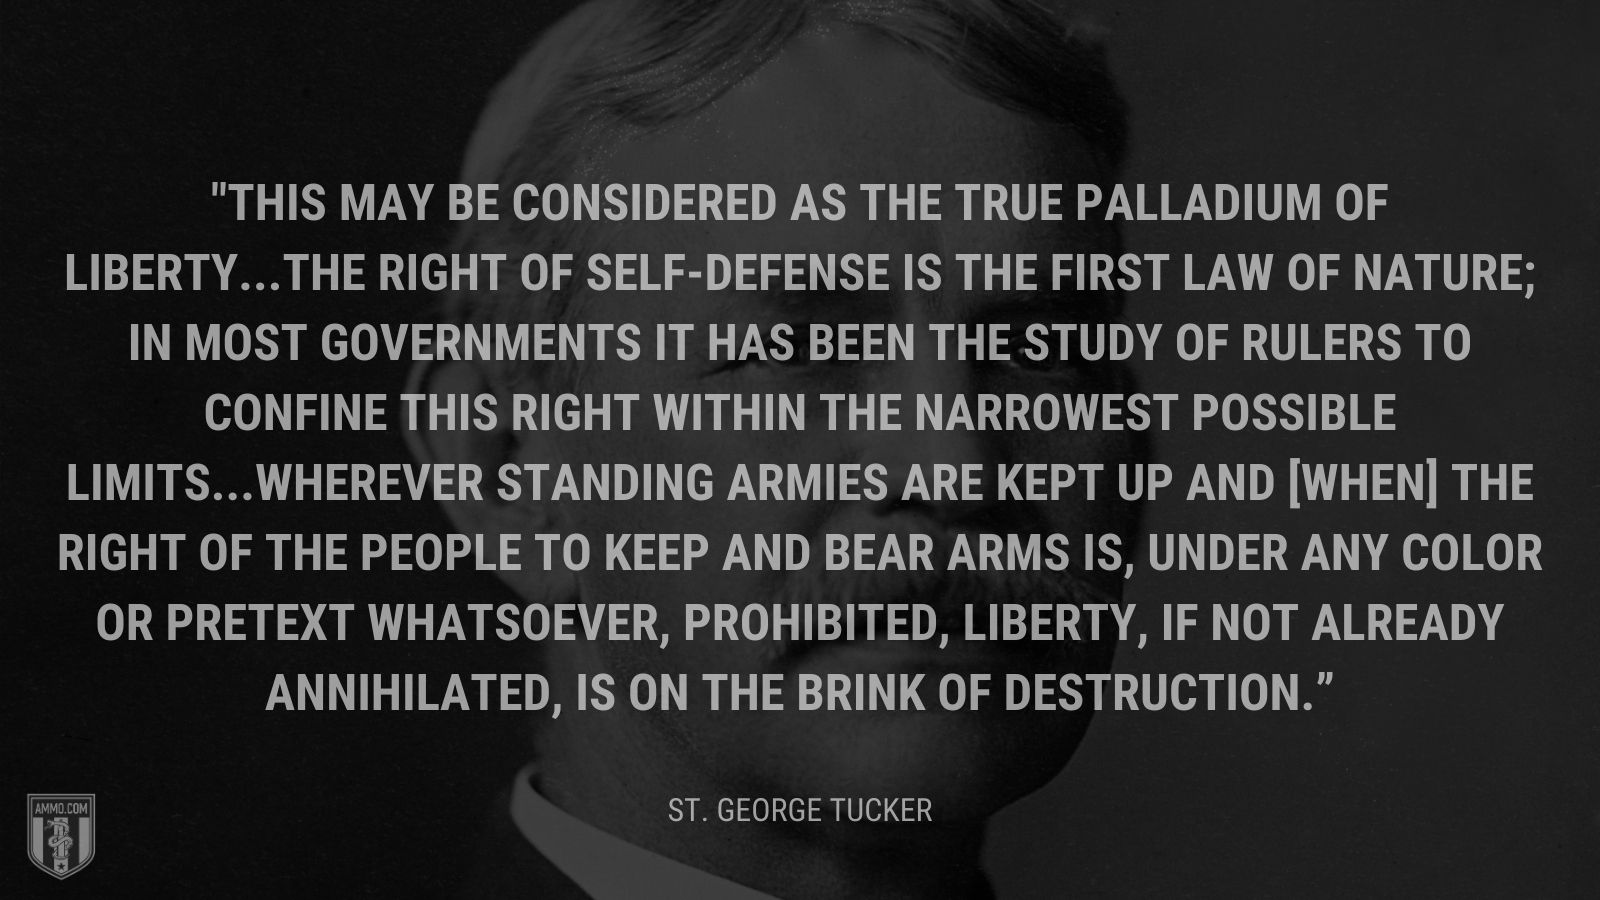 “This may be considered as the true palladium of liberty...The right of self-defense is the first law of nature; in most governments it has been the study of rulers to confine this right within the narrowest possible limits...Wherever standing armies are kept up and [when] the right of the people to keep and bear arms is, under any color or pretext whatsoever, prohibited, liberty, if not already annihilated, is on the brink of destruction.” - St. George Tucker